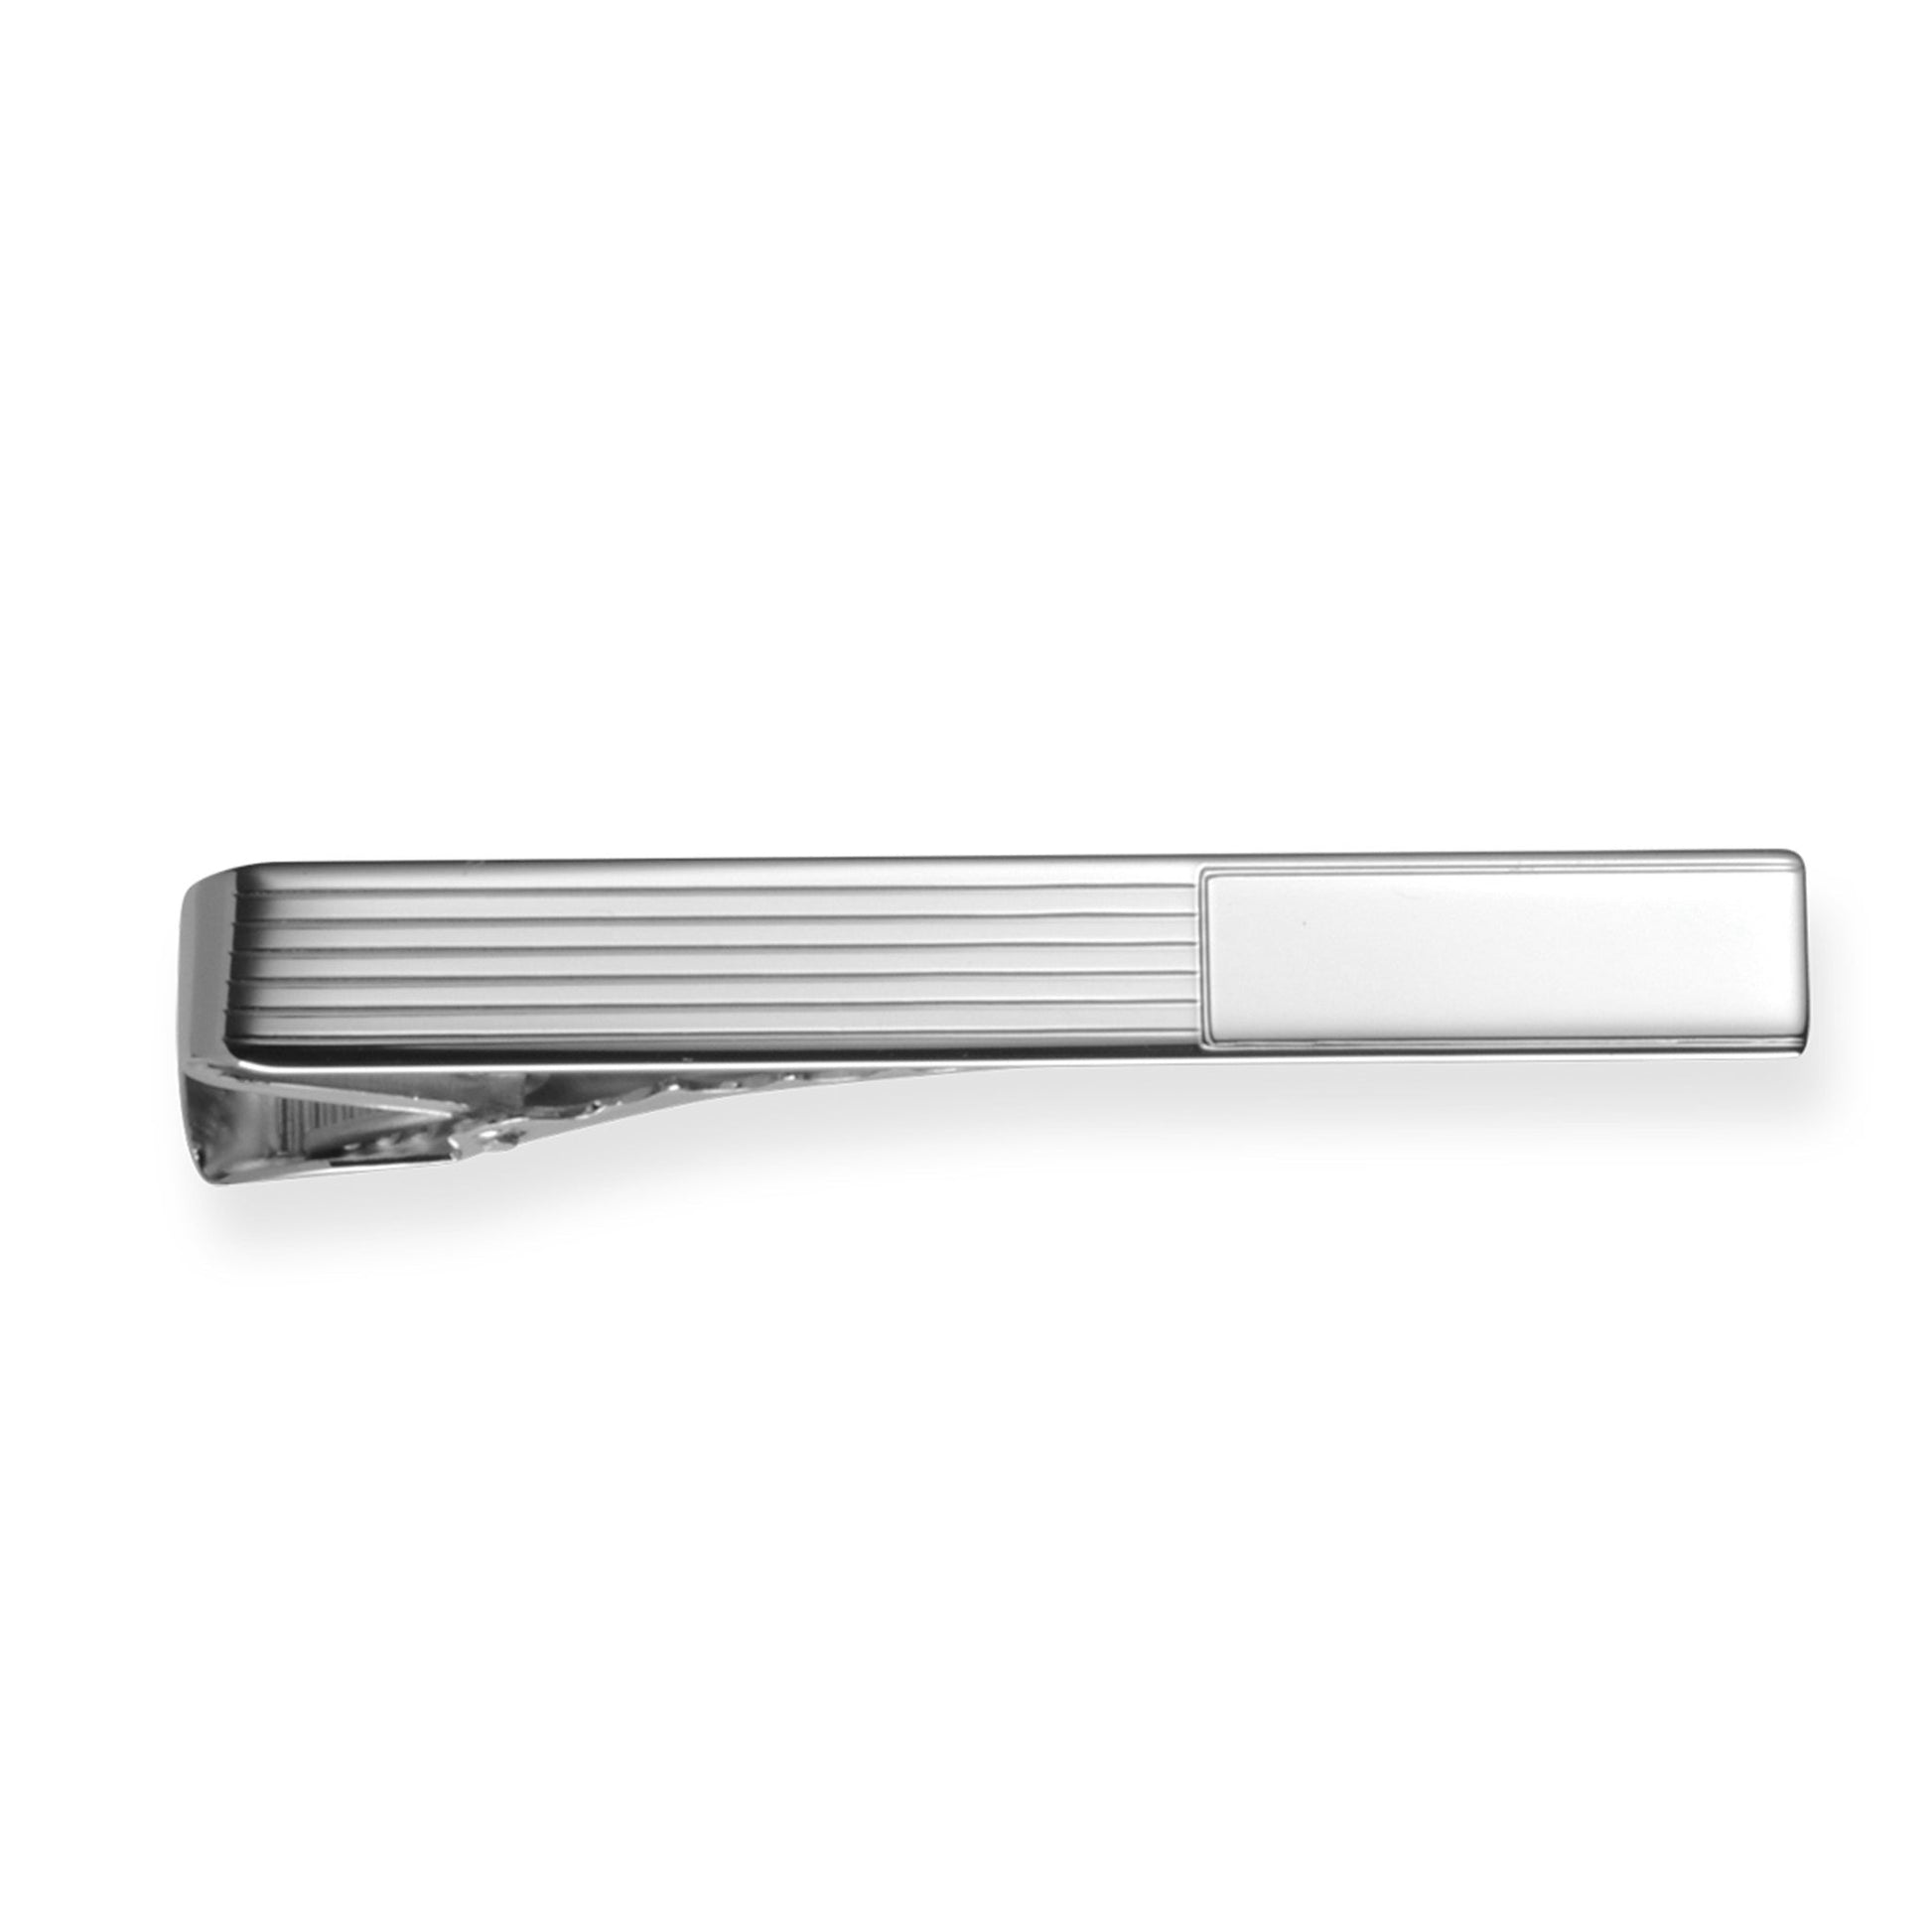 A polished sterling silver engine-turned tie bar displayed on a neutral white background.